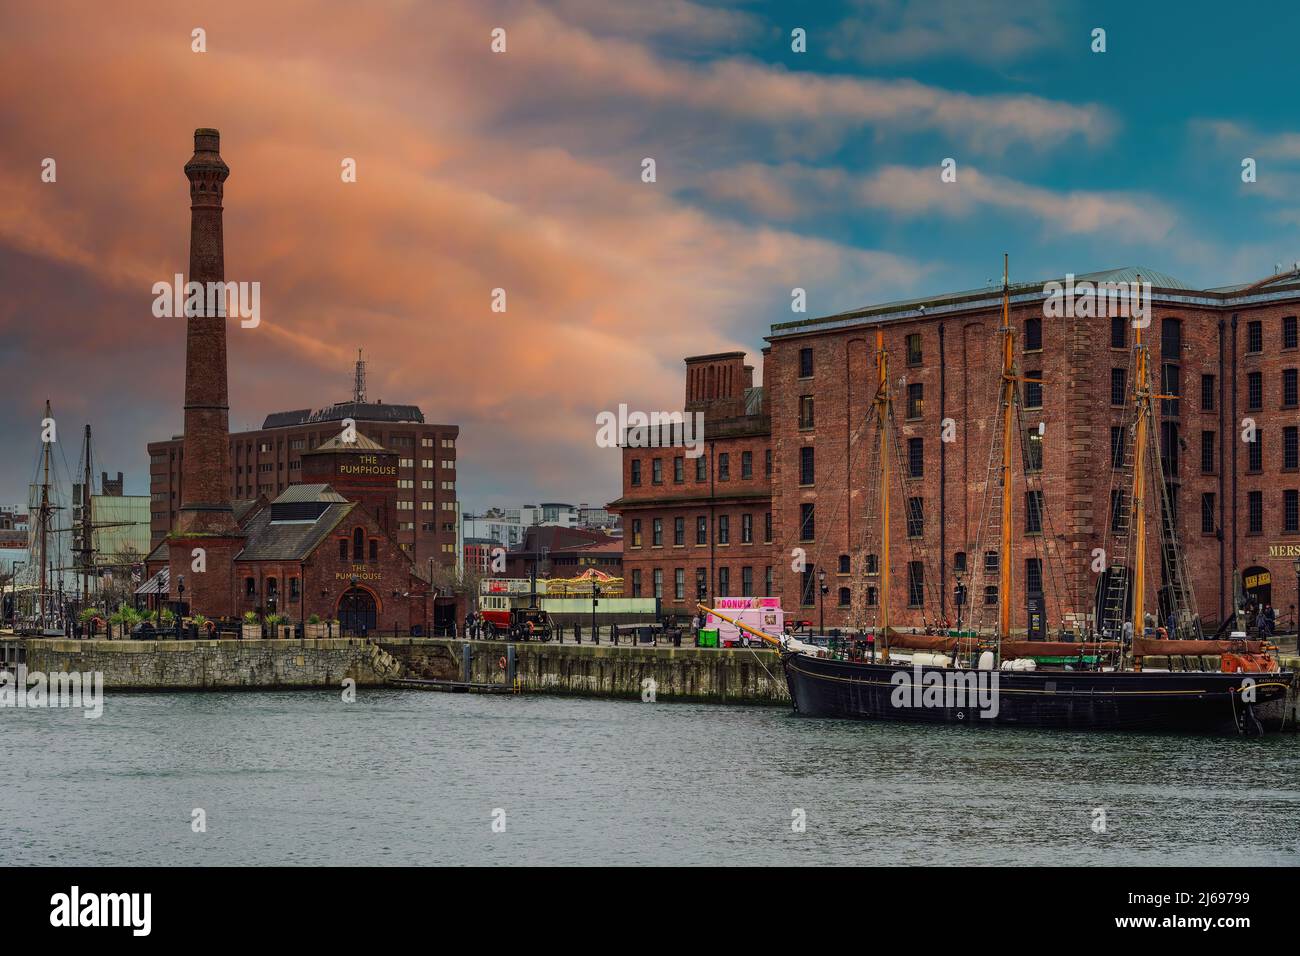 Evening view of Royal Albert Dock brick and stone buildings and warehouses, including The Pumphouse, Liverpool, Merseyside, England, United Kingdom Stock Photo